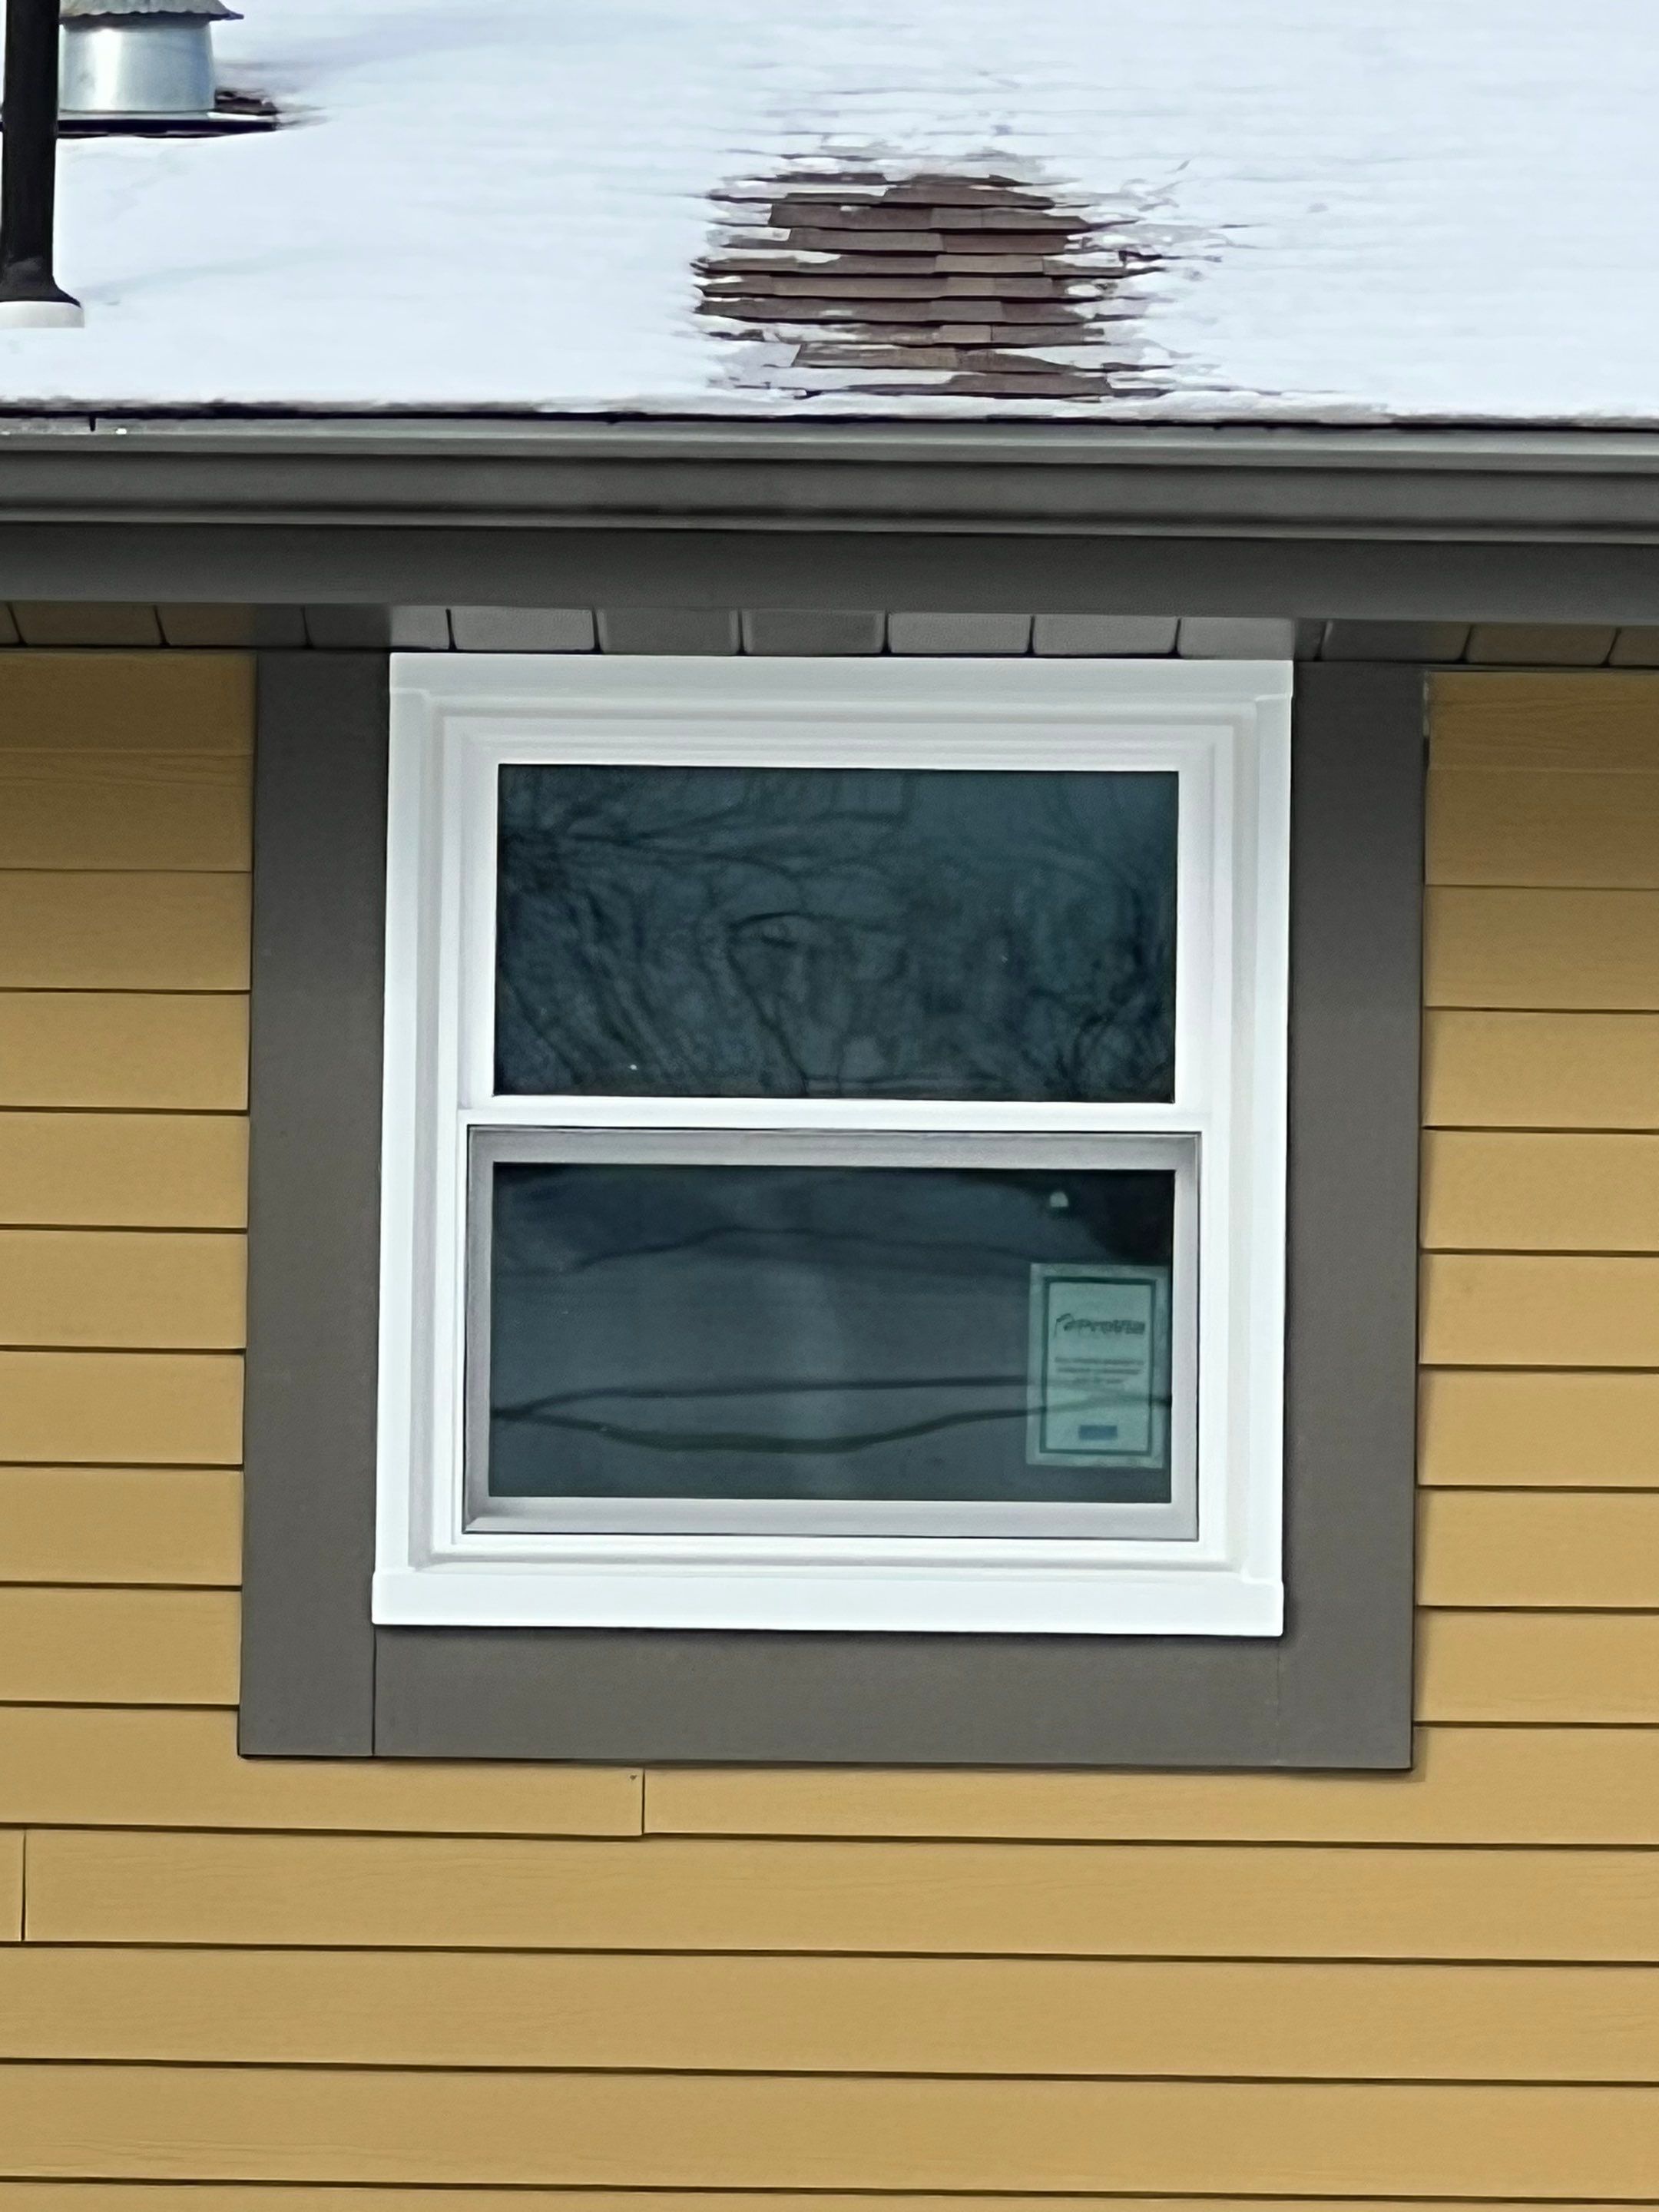 New Windows by Mt. Pleasant Window & Remodeling